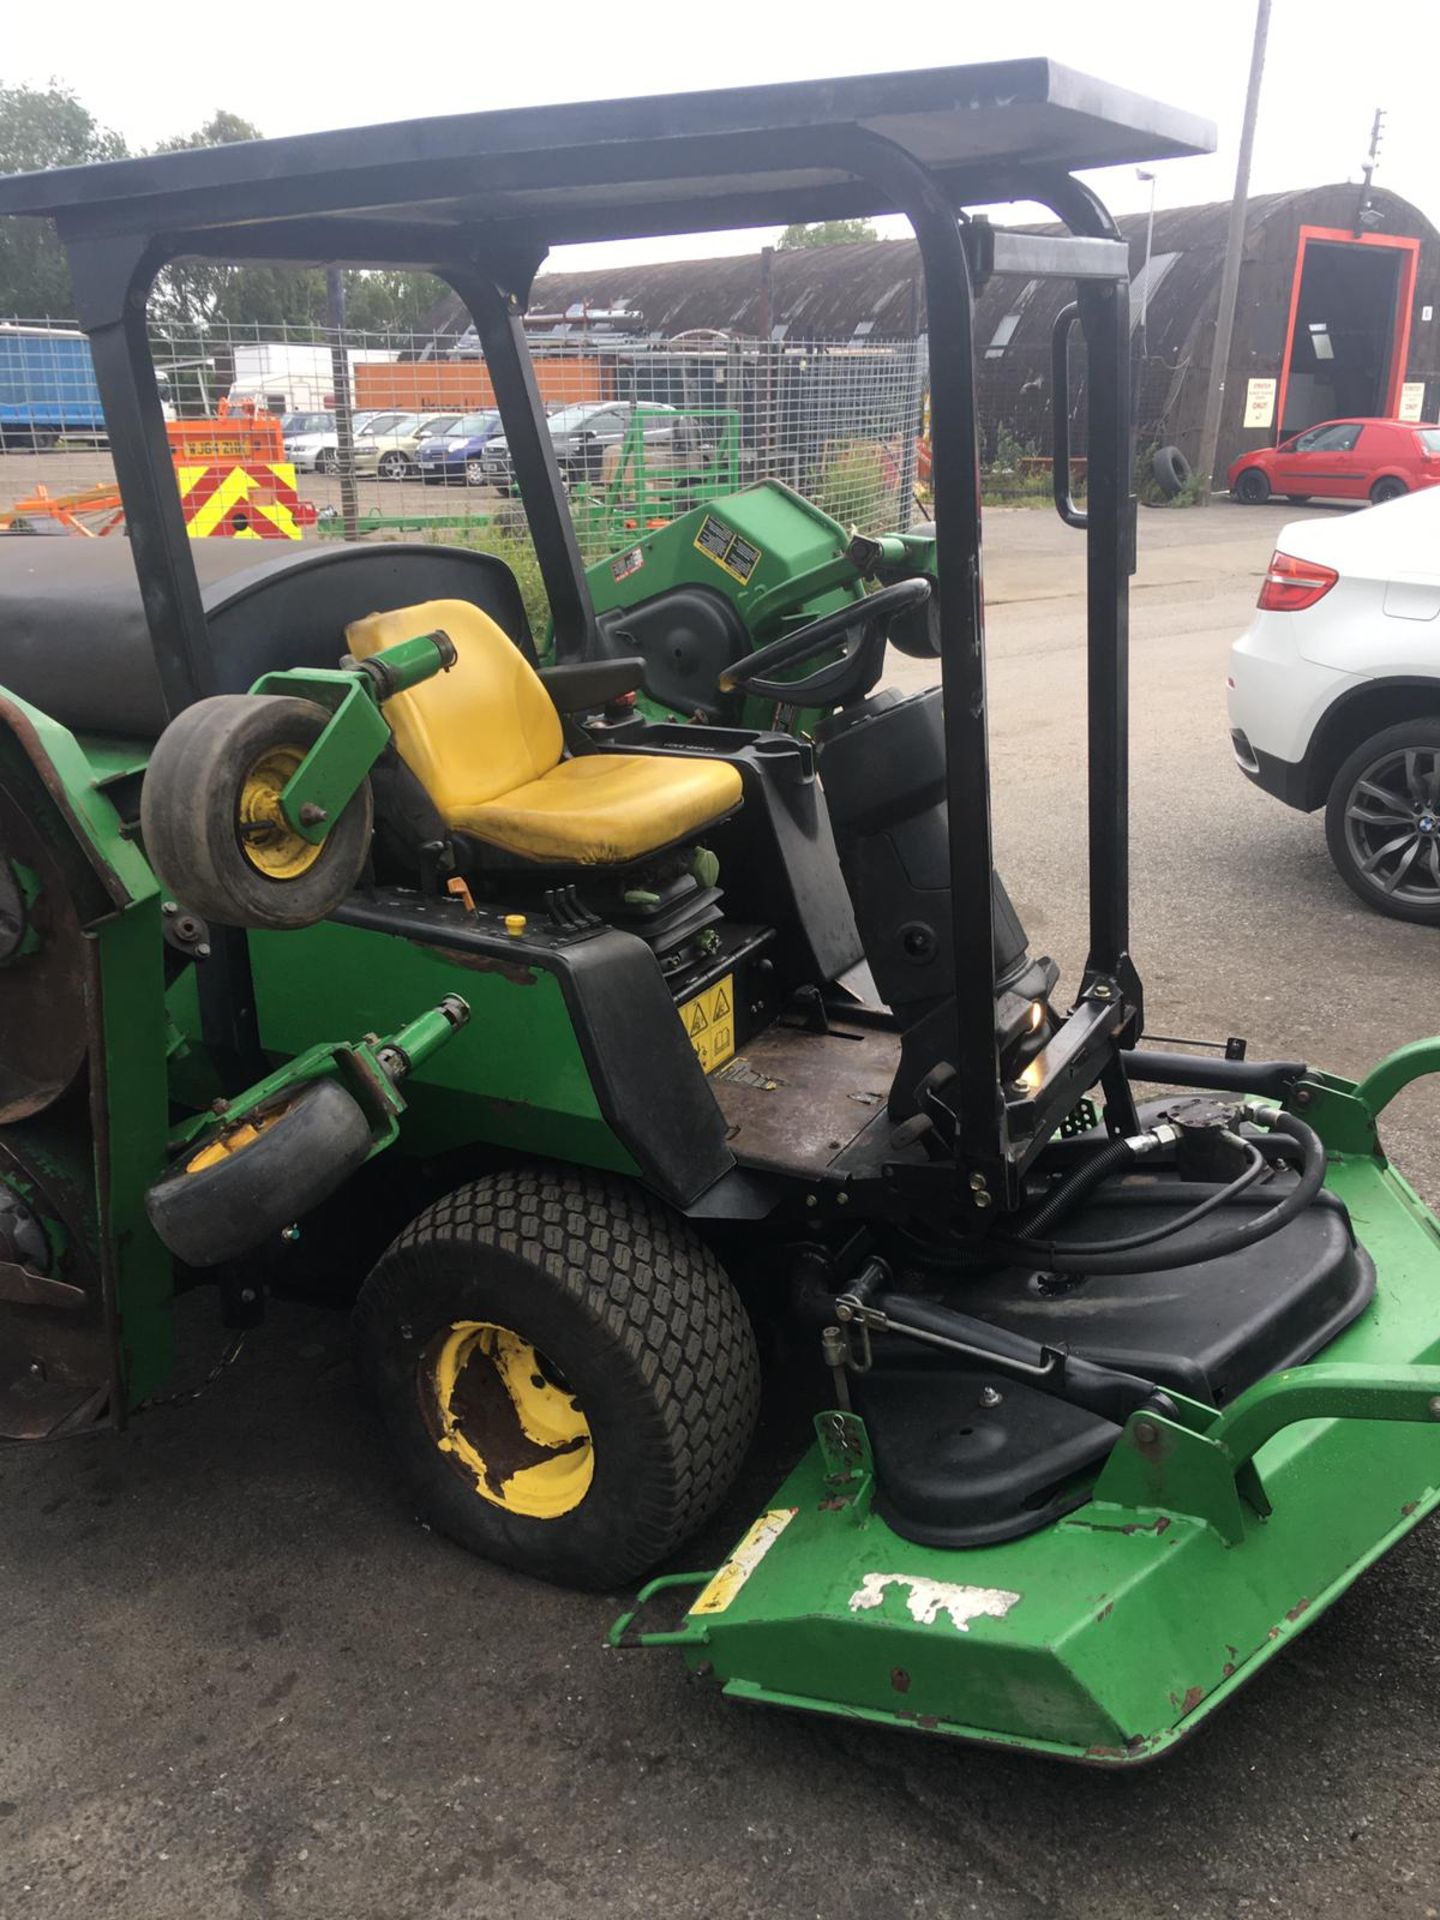 JOHN DEERE 1600 WIDE AREA TURBO BATWING RIDE ON LAWN MOWER, CRUISE CONTROL, RUNS & WORKS *NO VAT* - Image 10 of 24